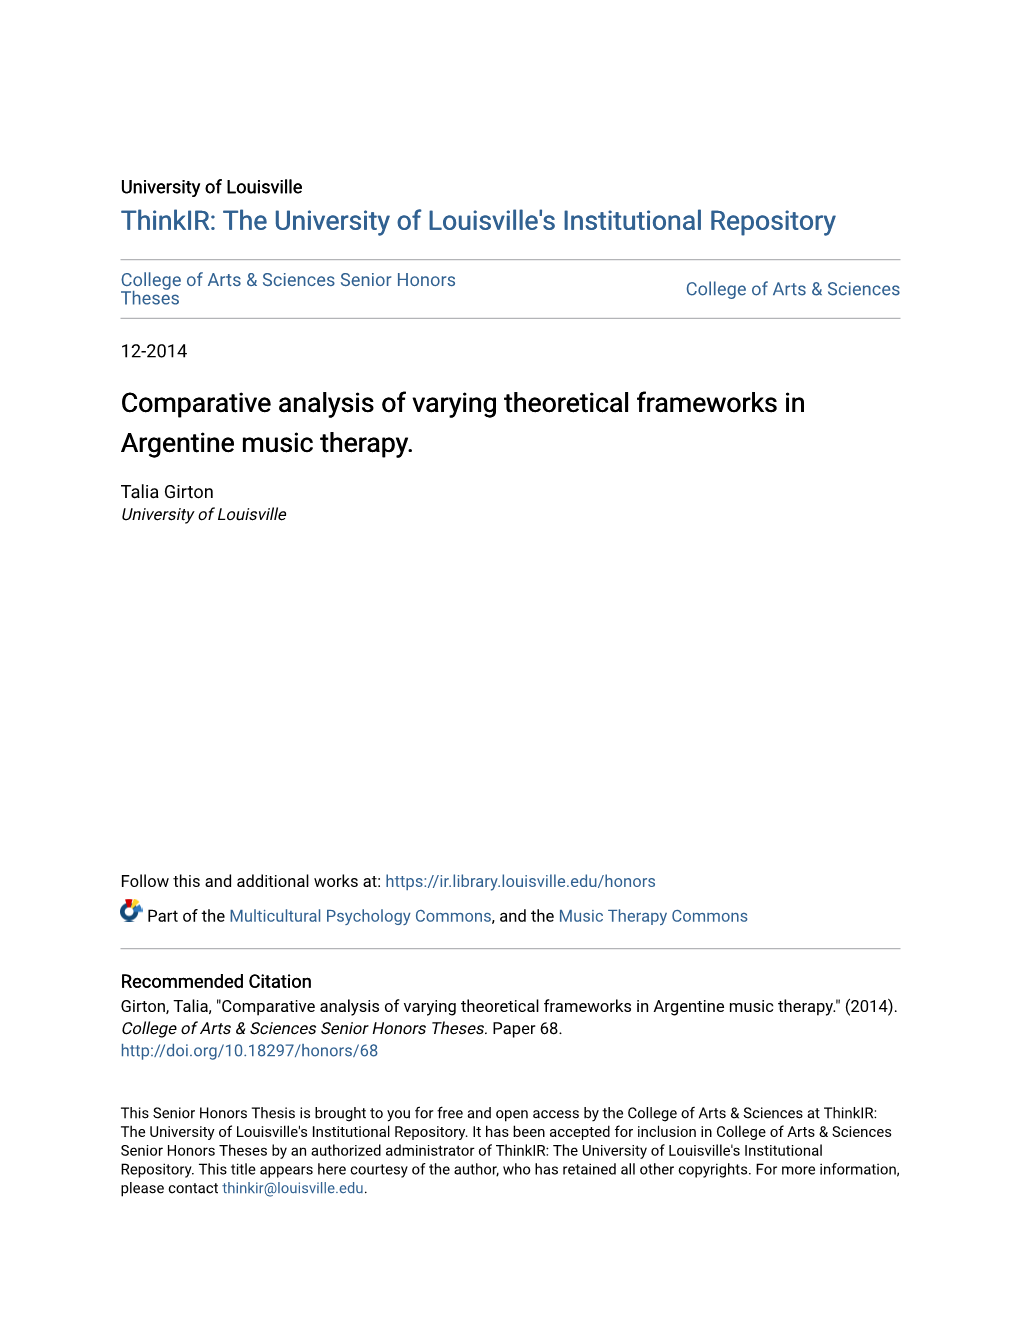 Comparative Analysis of Varying Theoretical Frameworks in Argentine Music Therapy